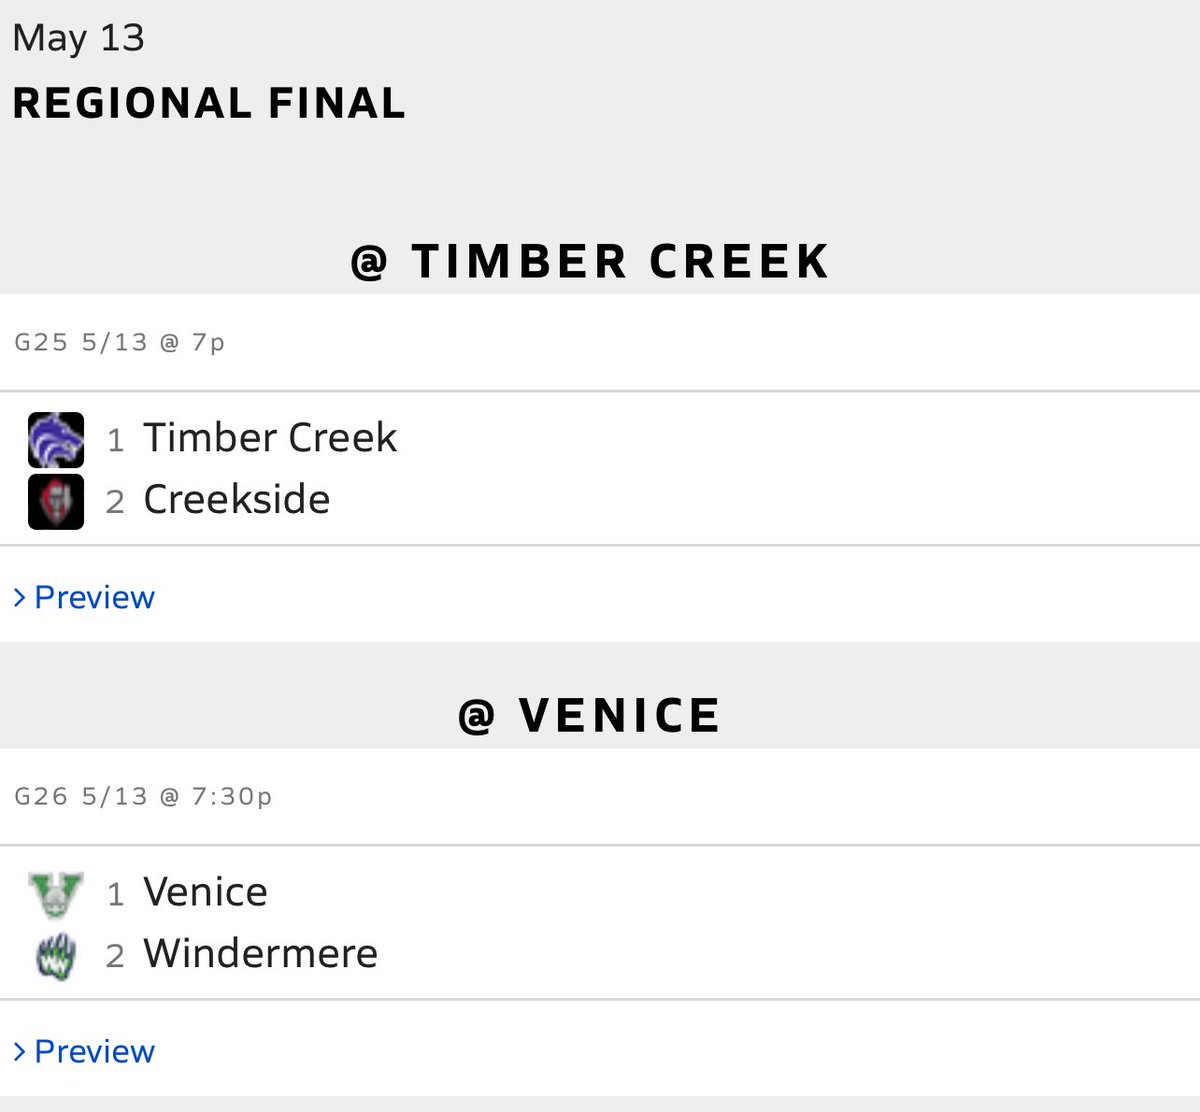 With a trip to the State Final Four on the line, #1 seed Venice (26-3) hosts the #2 seed Windermere (26-3) in the Regional Final on Monday night at 7:30 pm. Come out and support the Indians!